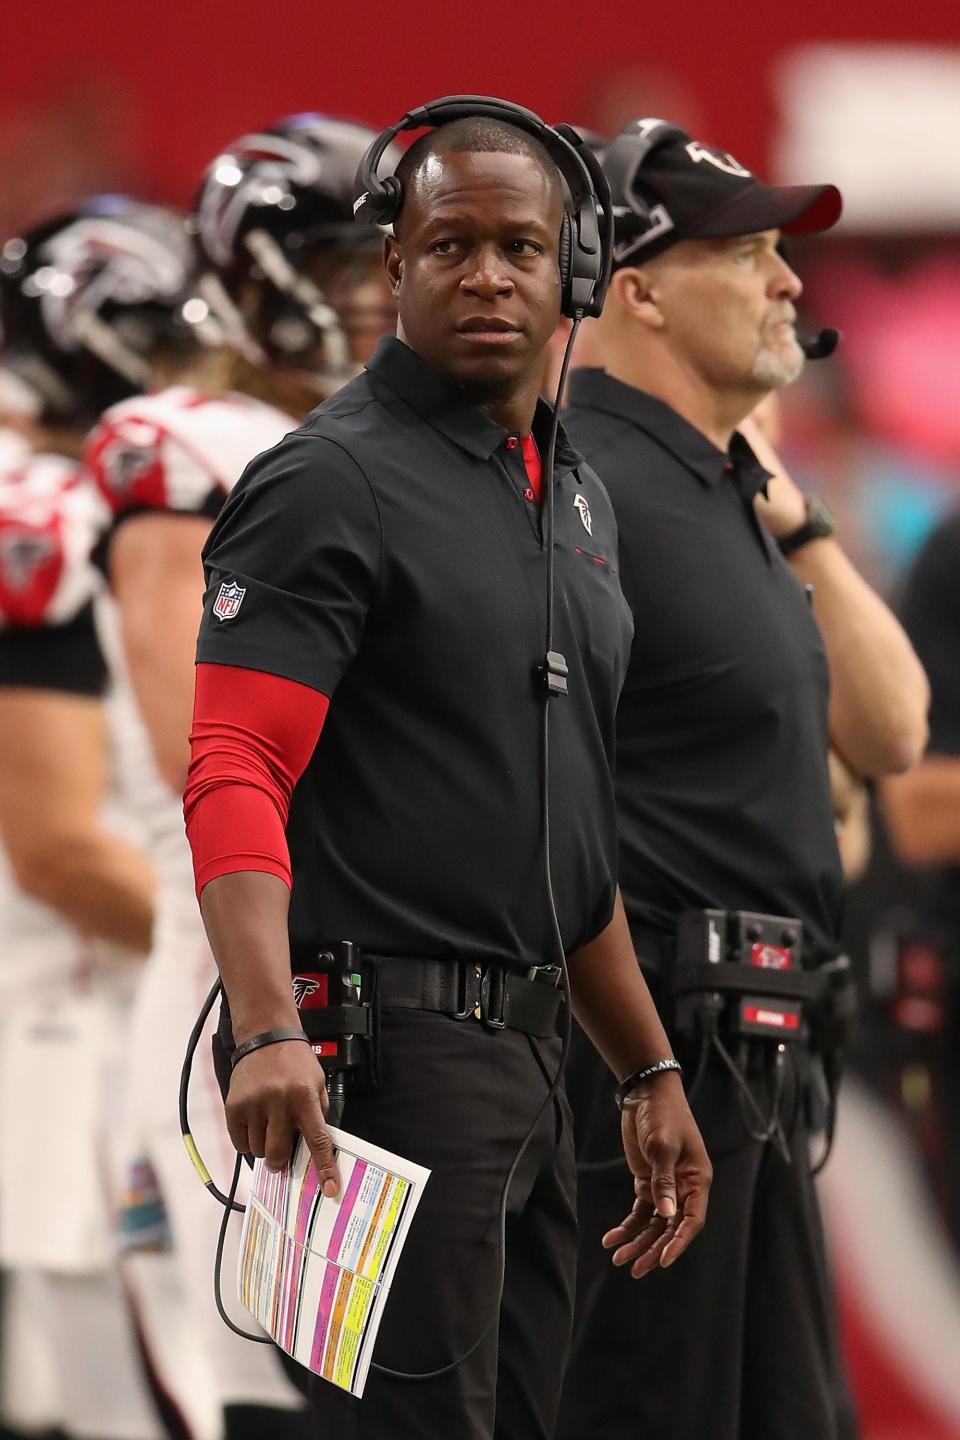 GLENDALE, ARIZONA - OCTOBER 13:  Coach Raheem Morris of the Atlanta Falcons during the second half of the NFL game against the Arizona Cardinals at State Farm Stadium on October 13, 2019 in Glendale, Arizona. The Cardinals defeated the Falcons 34-33. (Photo by Christian Petersen/Getty Images)